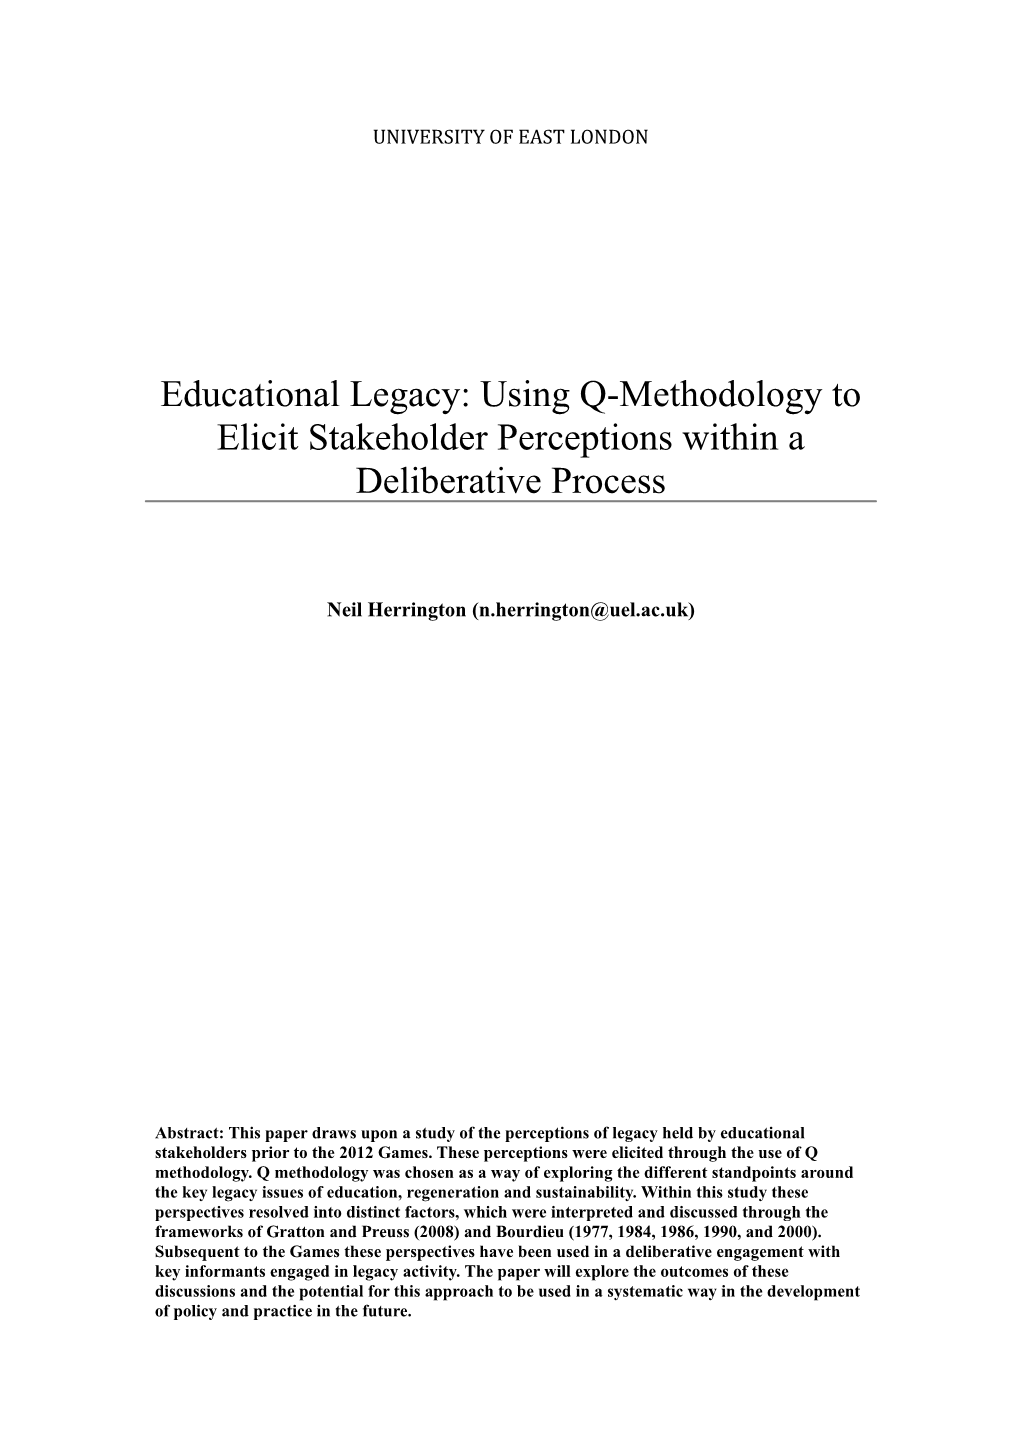 Educational Legacy: Using Q-Methodology to Elicit Stakeholder Perceptions Within a Deliberative